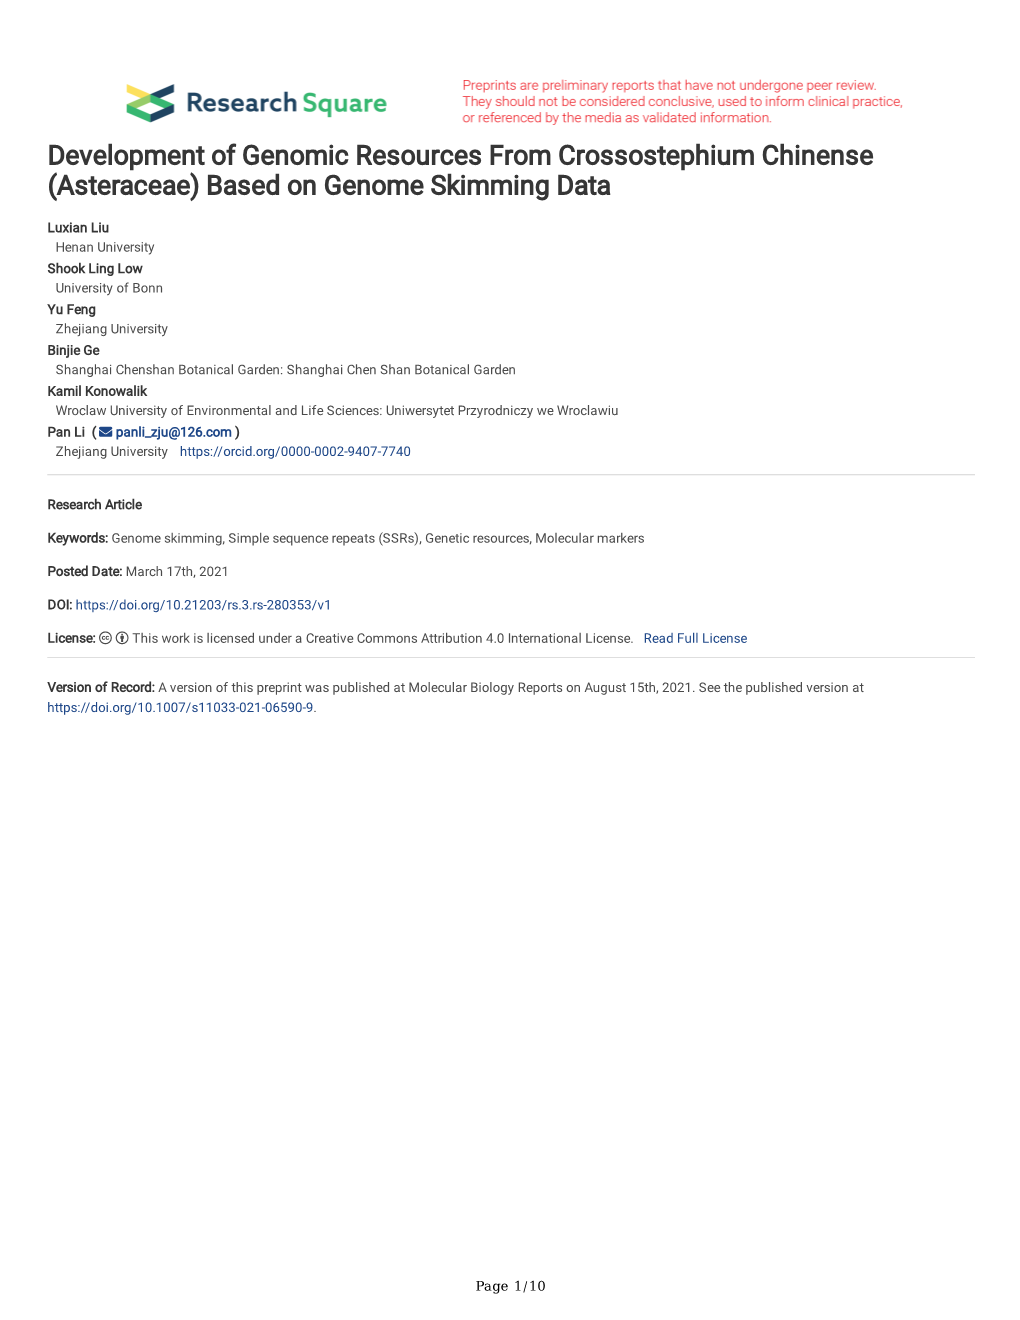 Development of Genomic Resources from Crossostephium Chinense (Asteraceae) Based on Genome Skimming Data